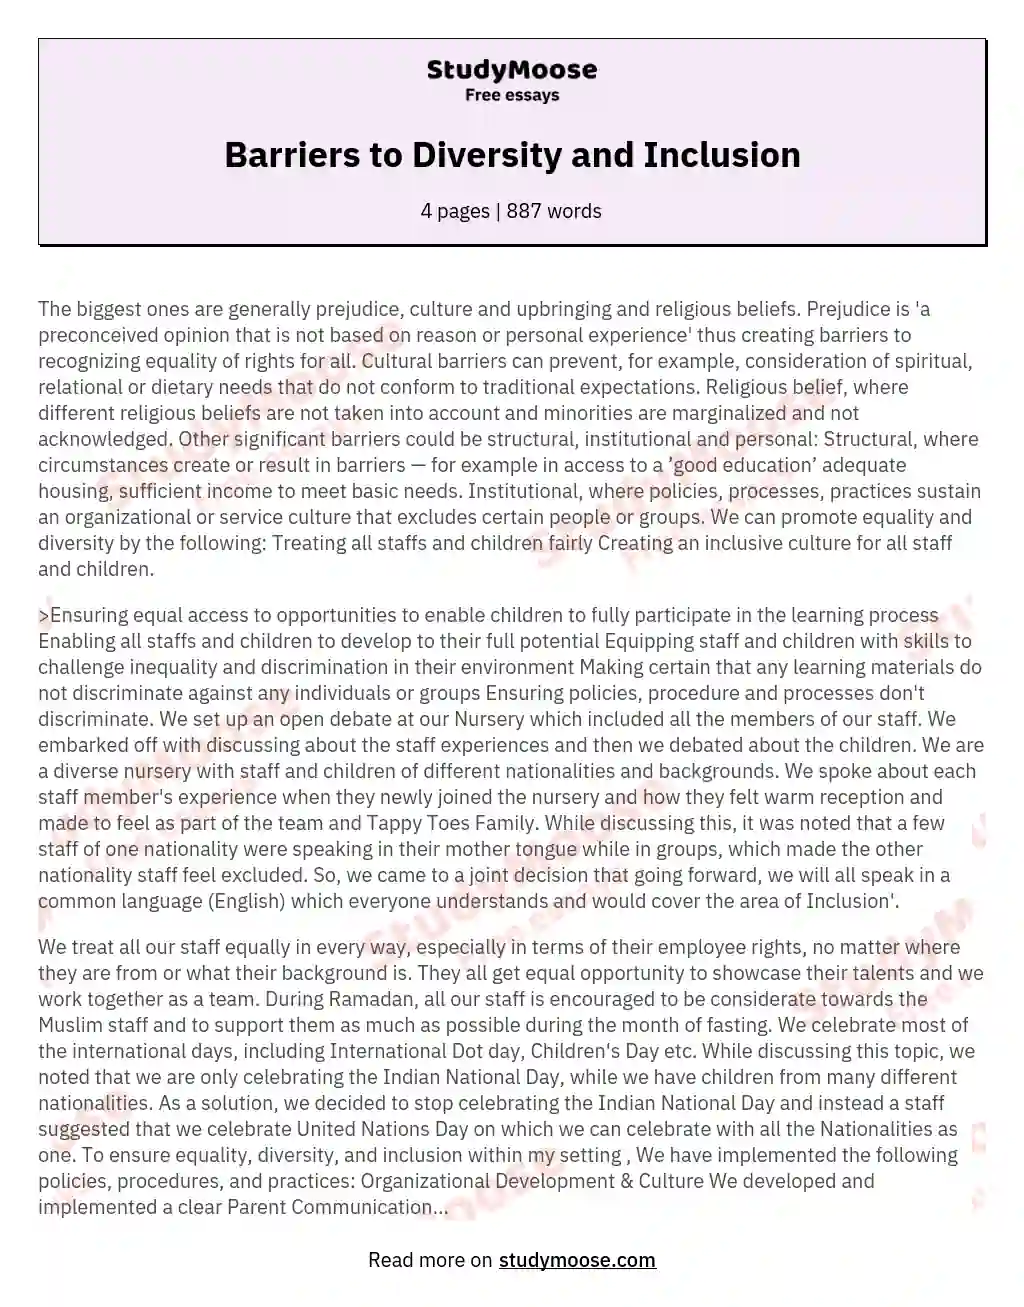 Barriers to Diversity and Inclusion essay